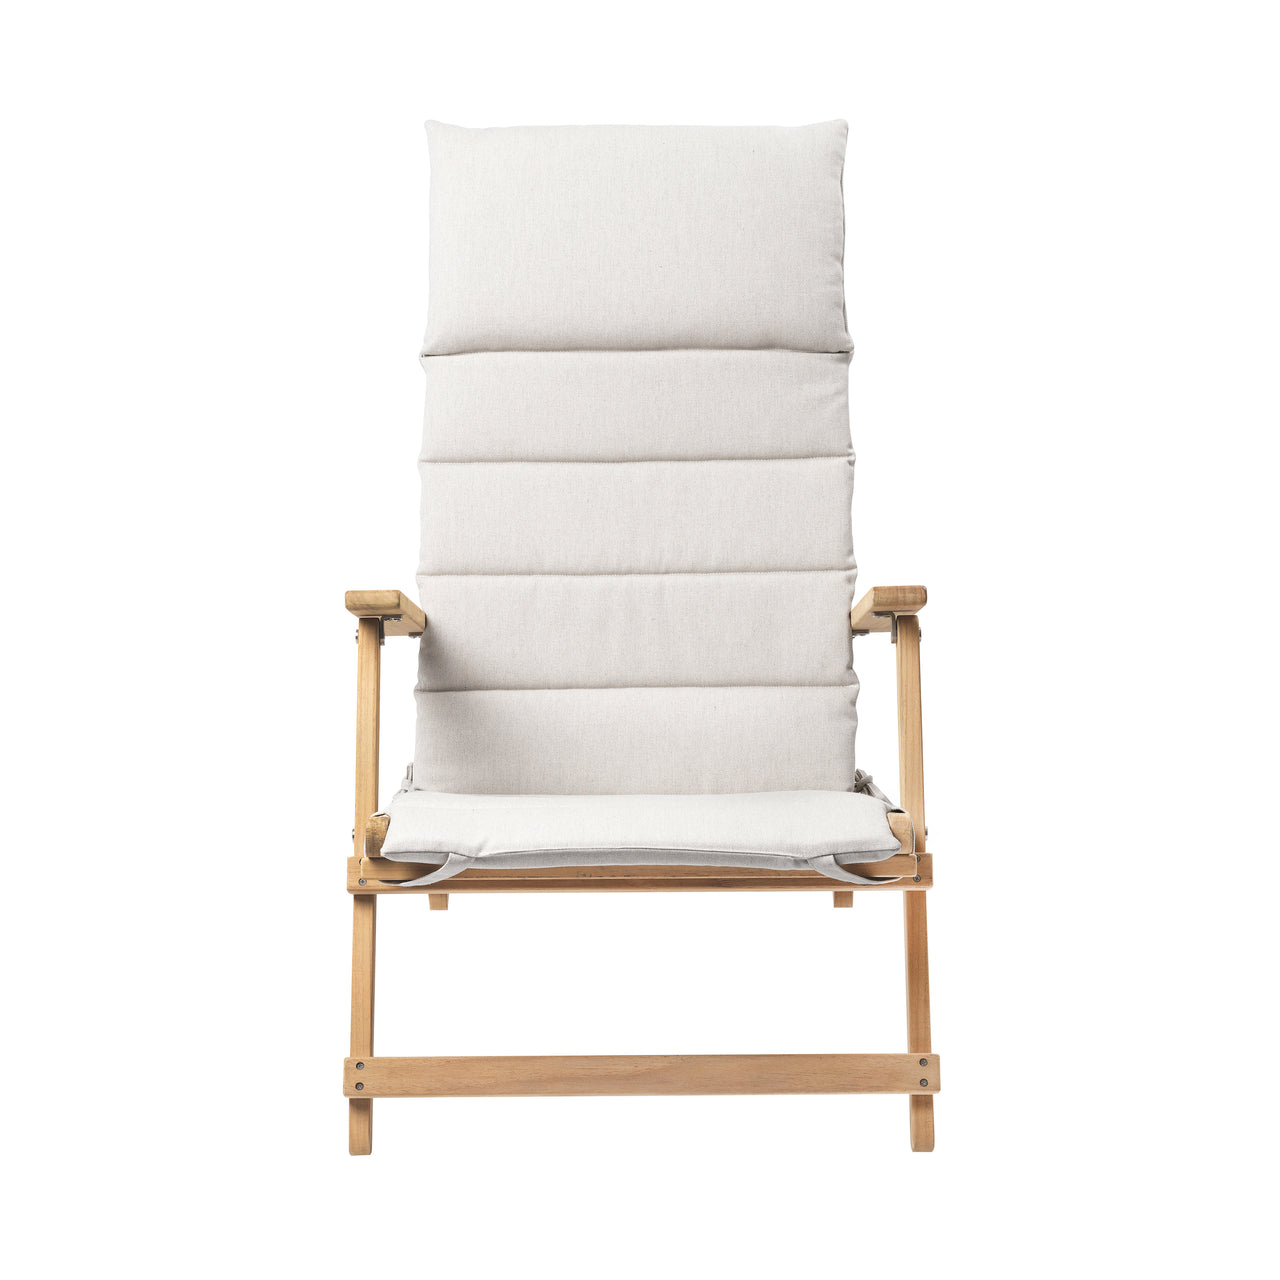 BM5568 Outdoor Deck Chair: With Cushion